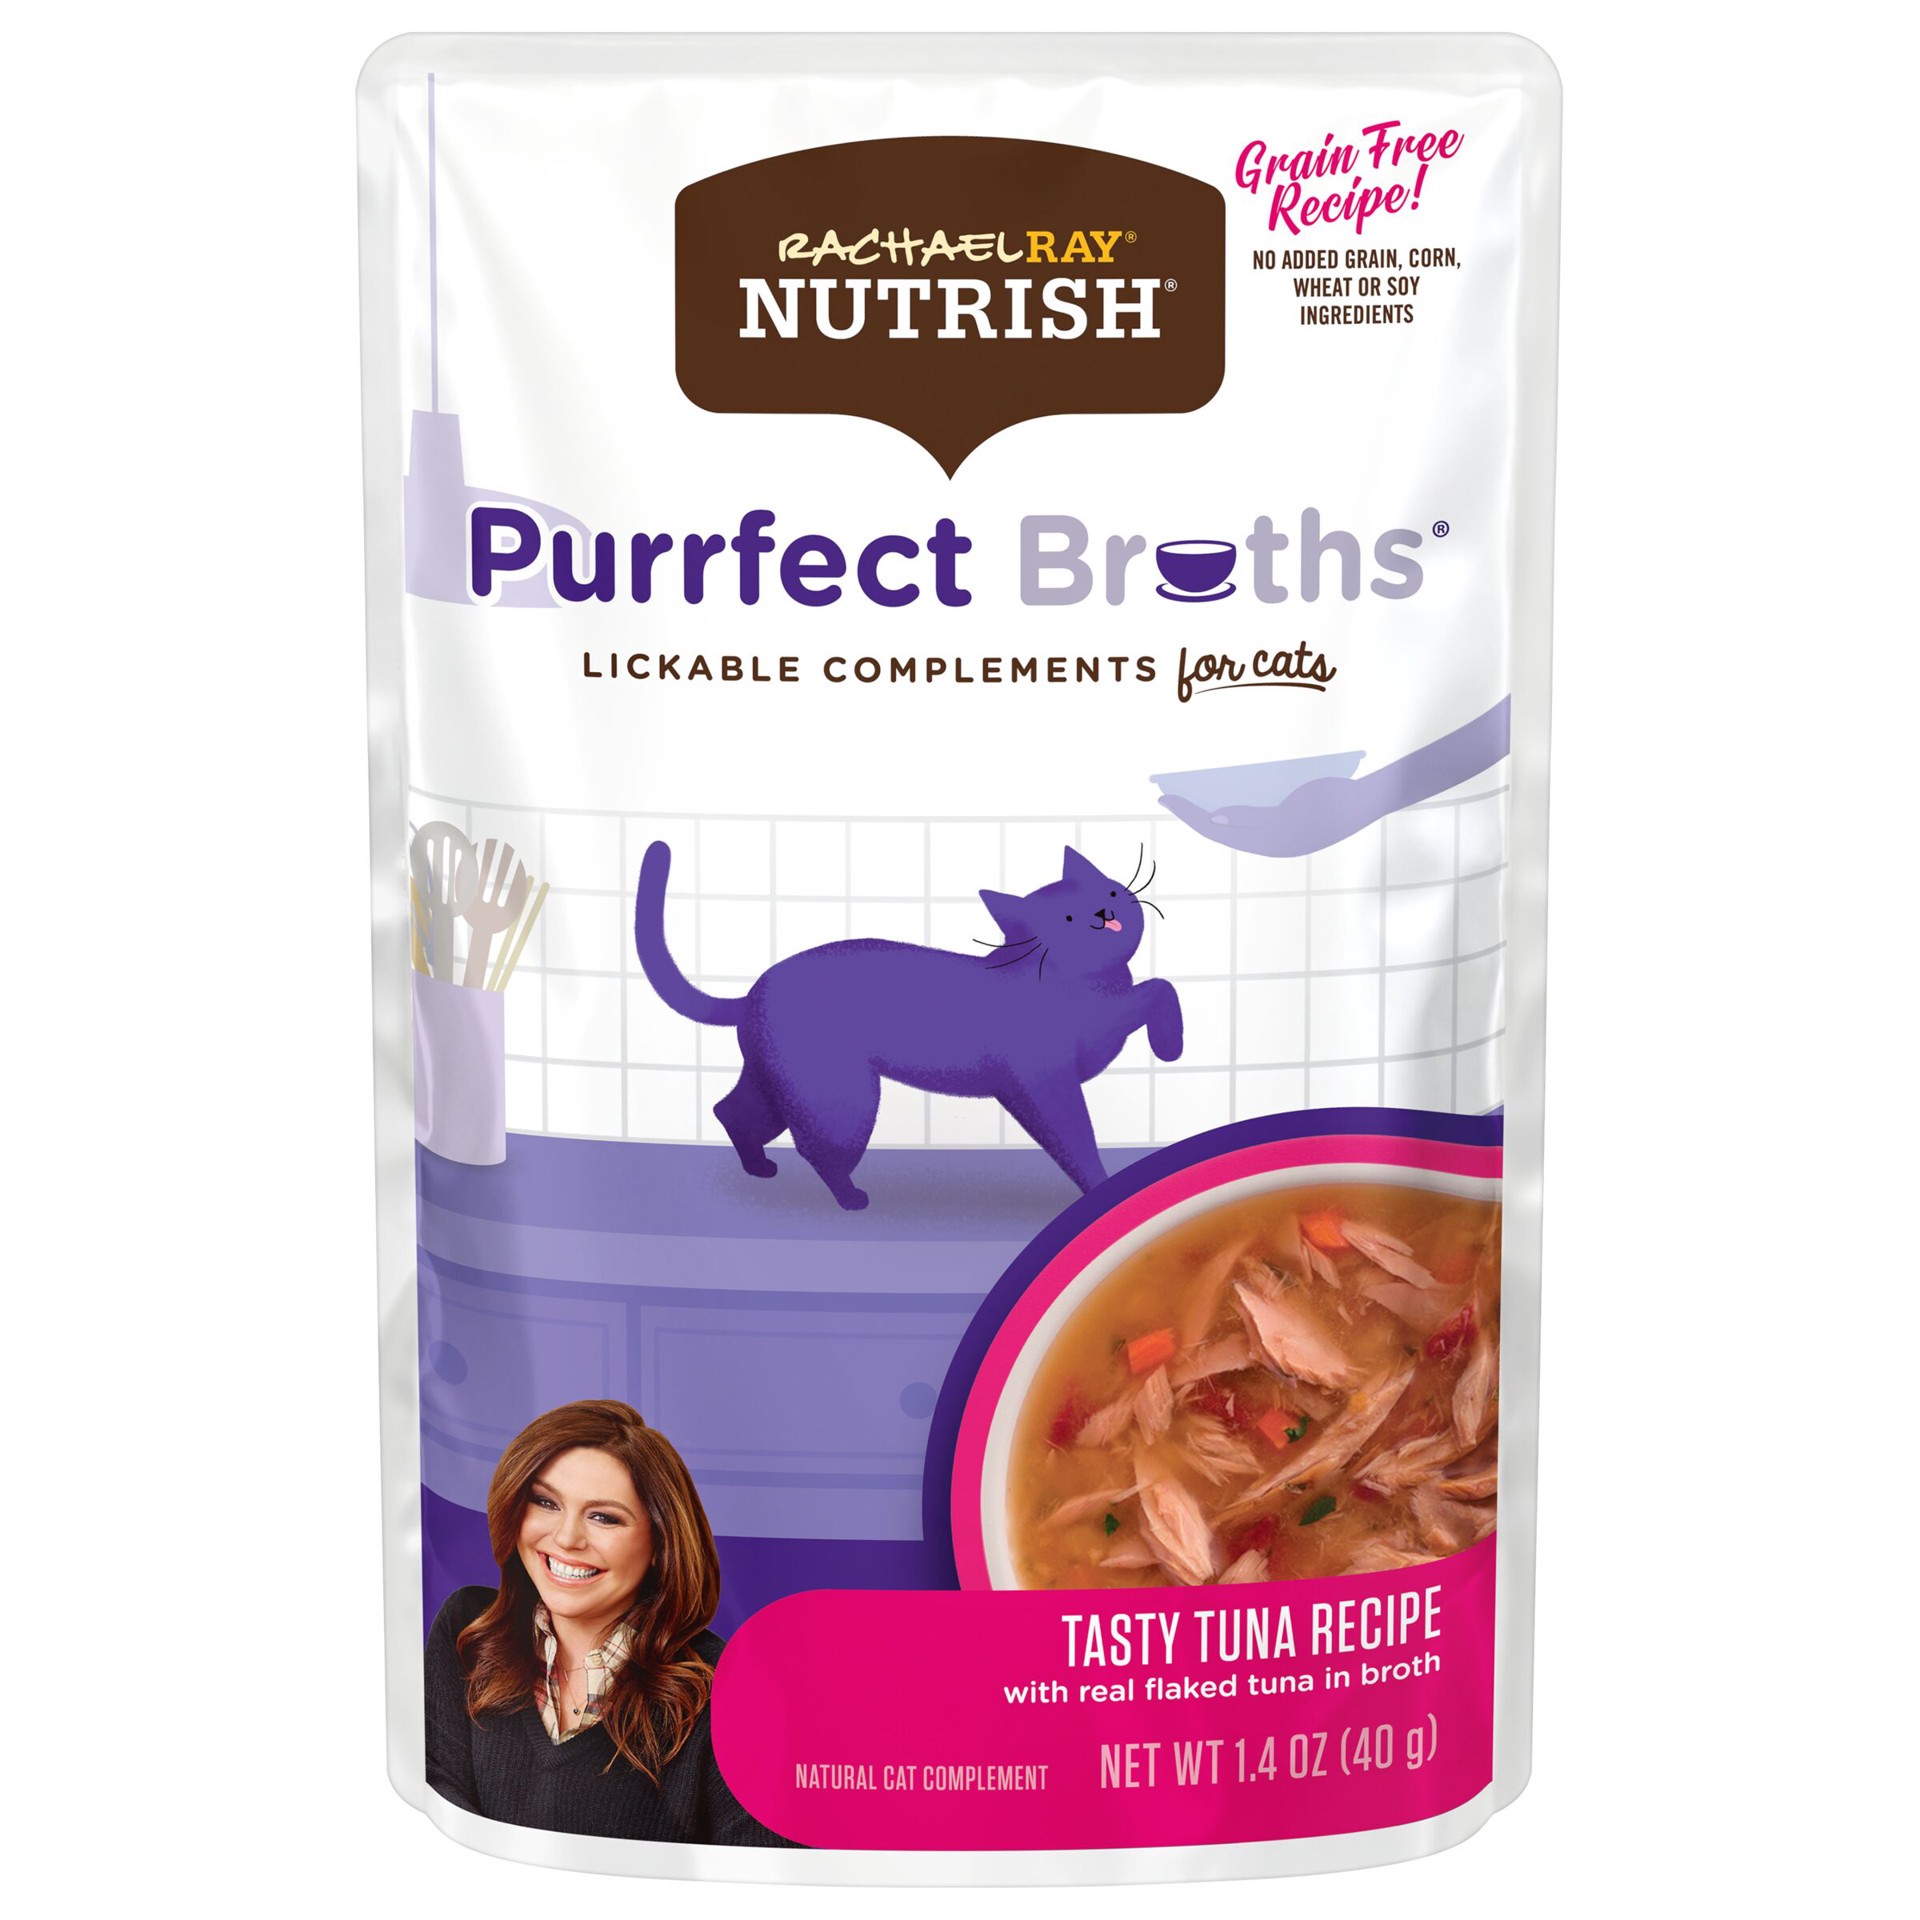 slide 1 of 17, Rachael Ray Nutrish Purrfect Broths All Natural Complement, Grain Free Tasty Tuna Recipe, 1.4 oz